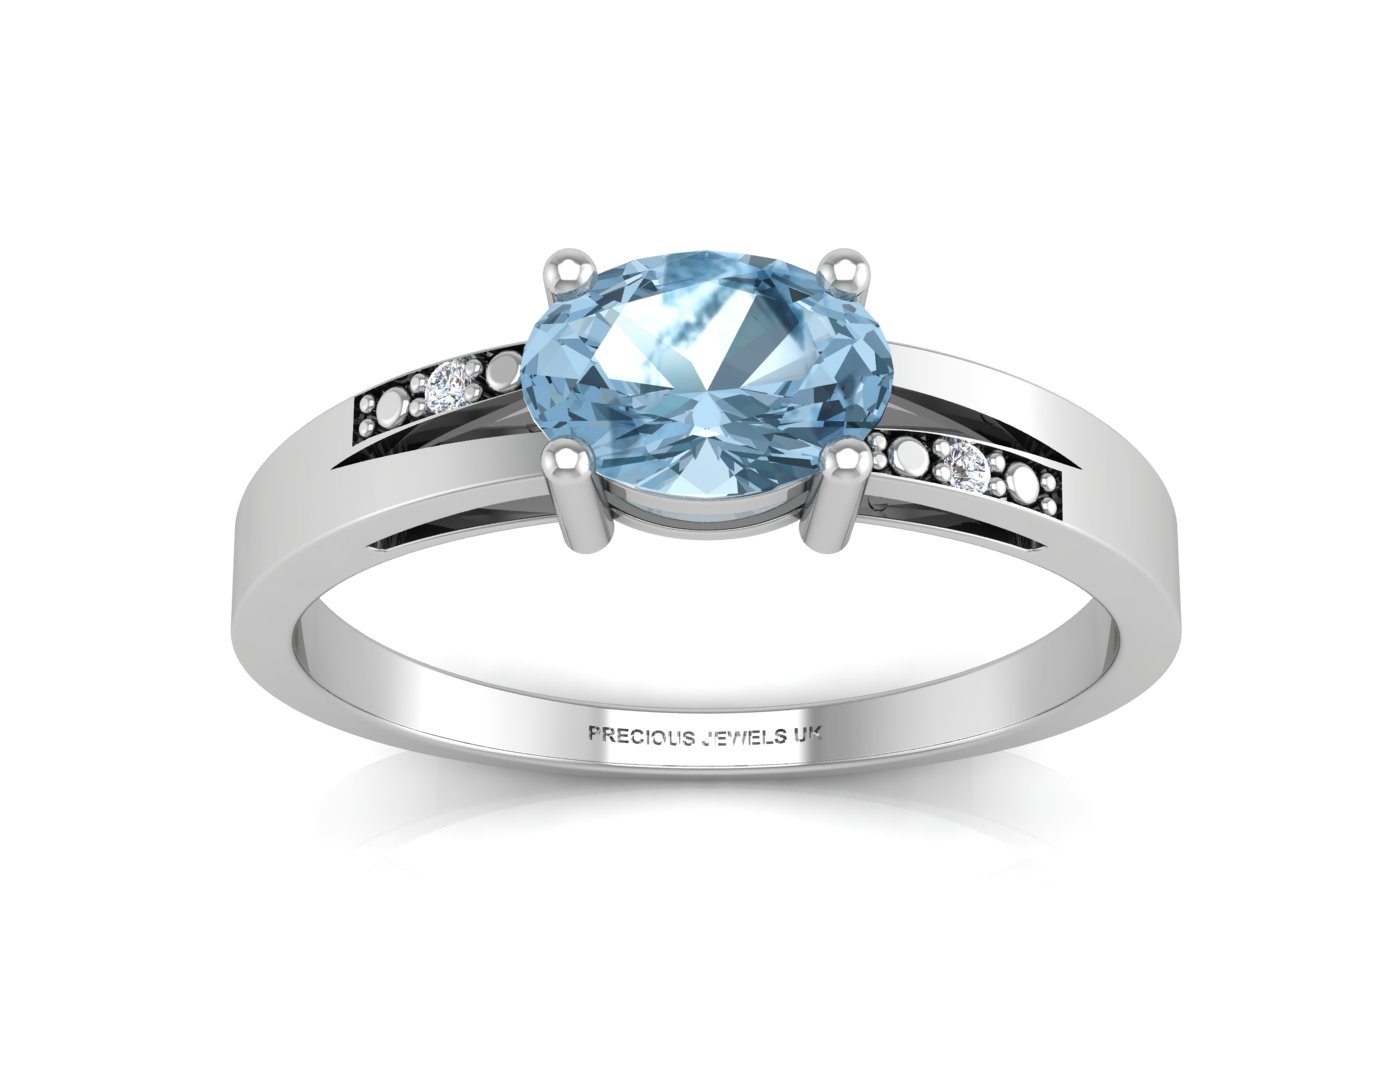 9ct White Gold Diamond And Blue Topaz Ring - Image 3 of 5